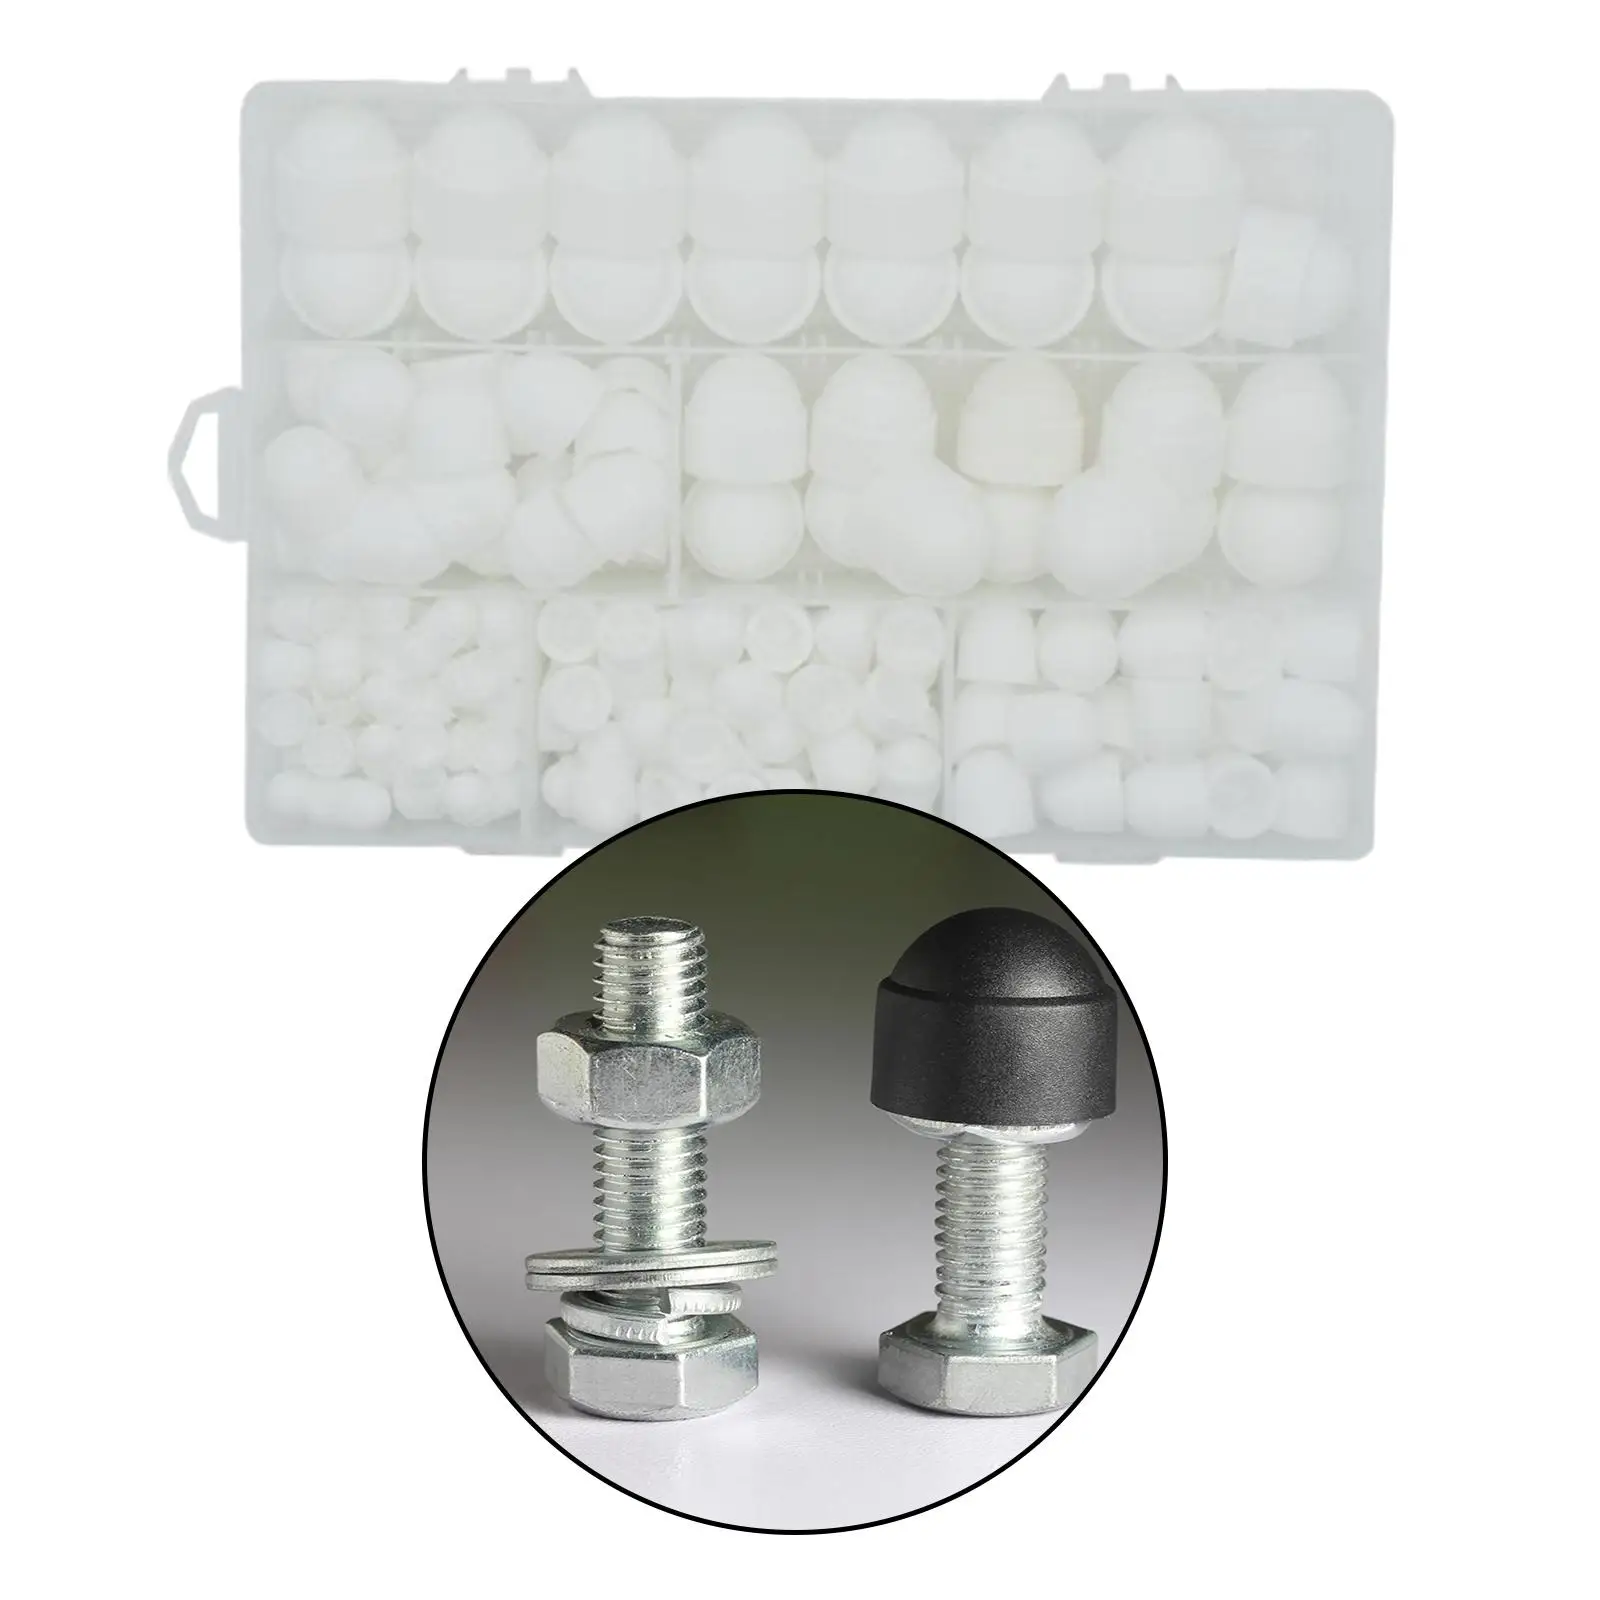 145x - Hexagon Nut Protection Cap Cover Screw Cover Caps Assortment Kits with Storage Box White High Performance